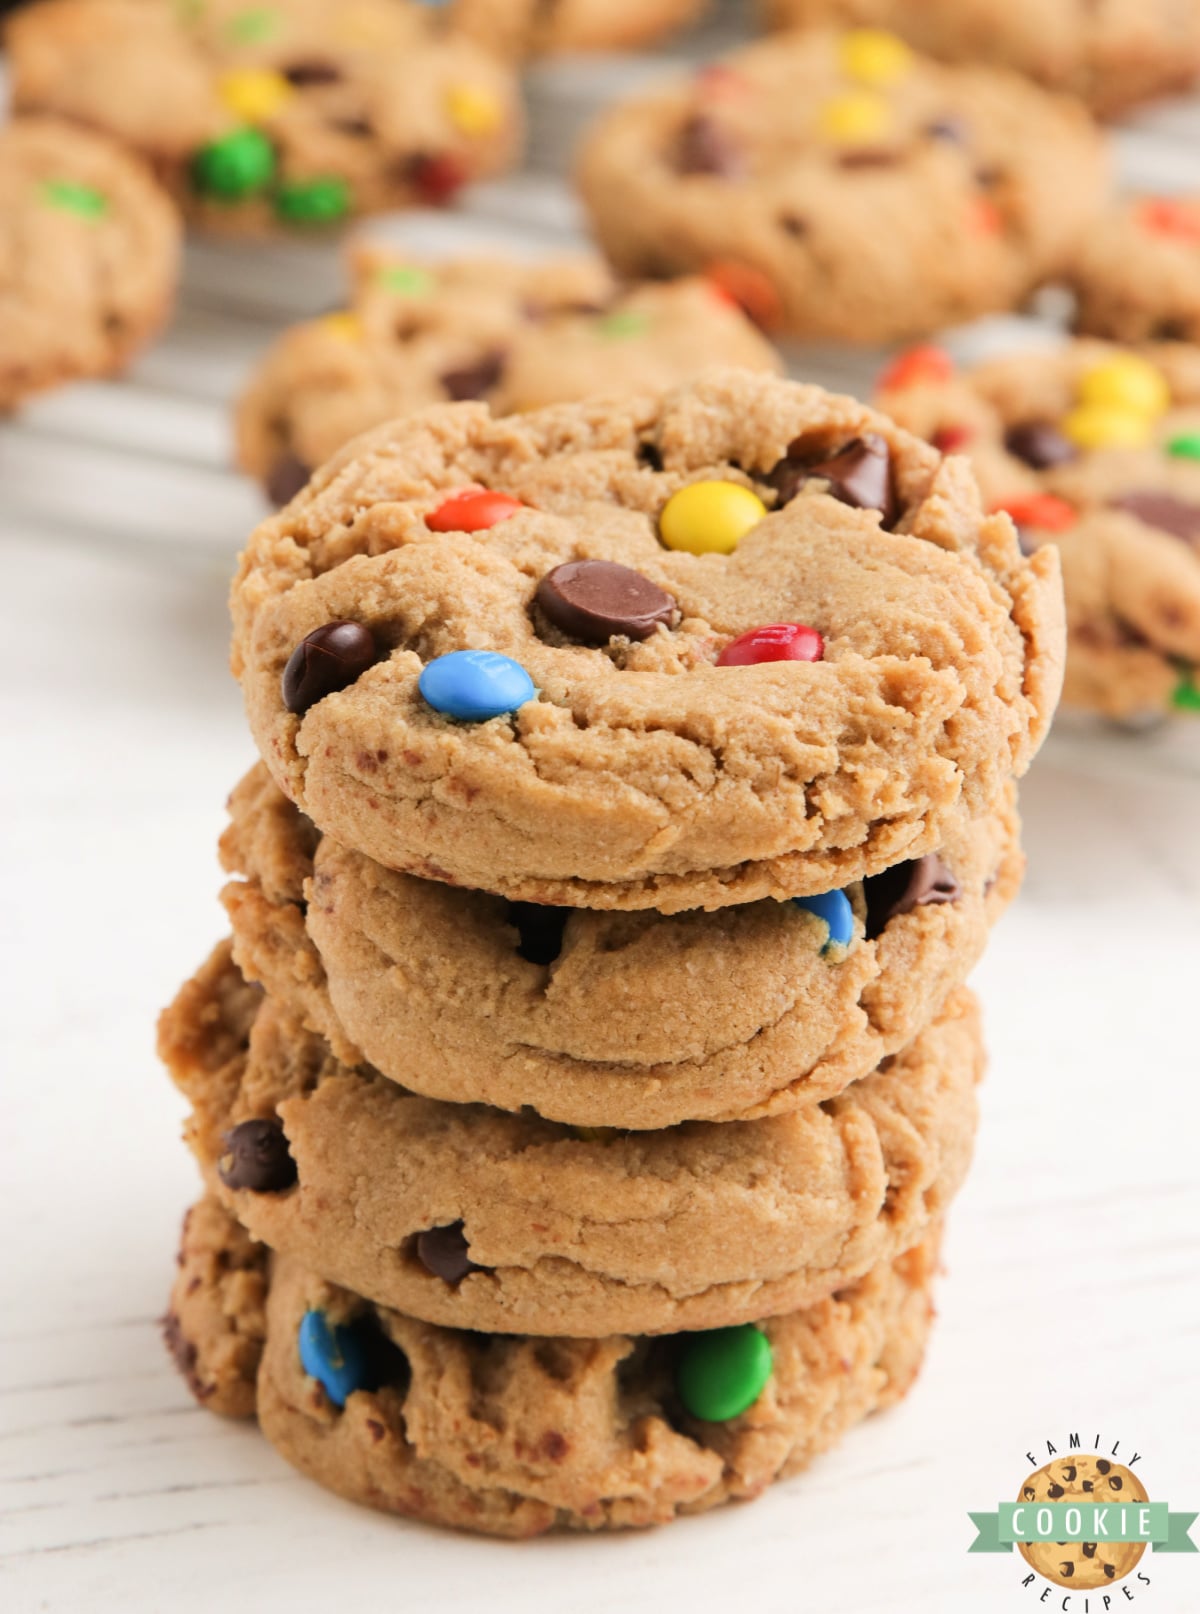 The Best Monster Cookies are made with peanut butter, chocolate chips, M&Ms and oatmeal! All of your favorite cookie flavors combined in one delicious cookie!